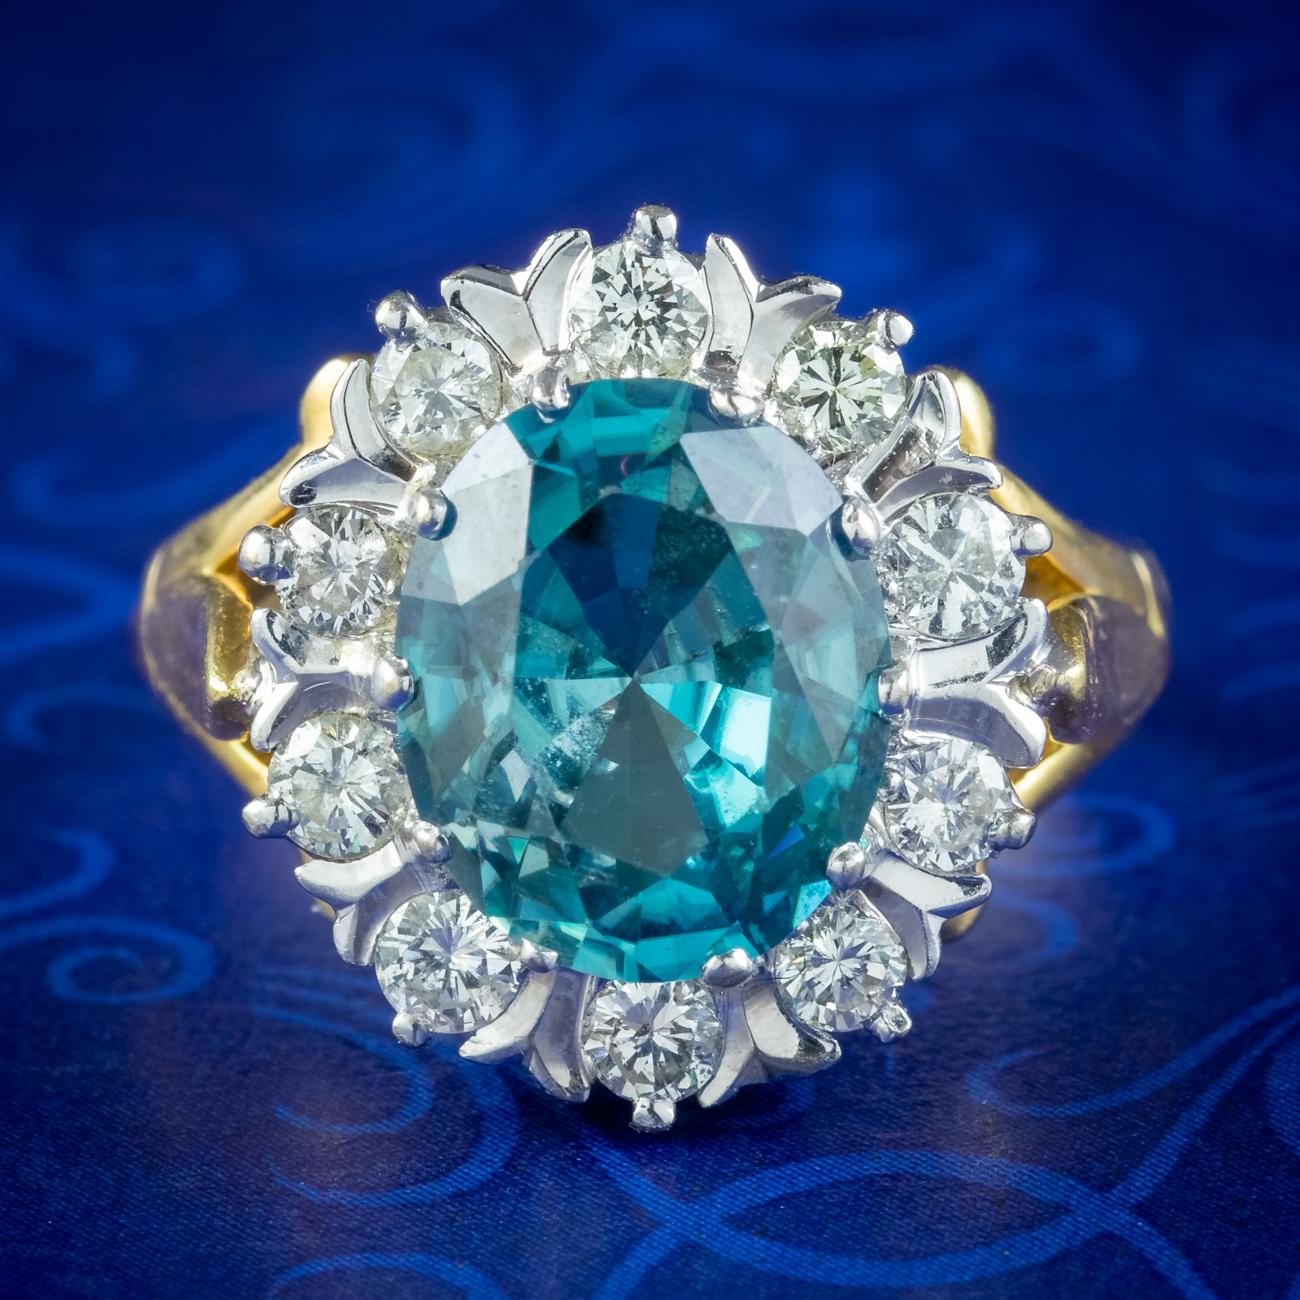 A spectacular vintage cluster ring crowned with a sparkling oval cut zircon with a deep teal-blue hue. It weighs approx. 3ct and is framed by ten sparkling brilliant cut diamonds around the outside, totalling approx. 0.80ct.

Zircon is an ancient